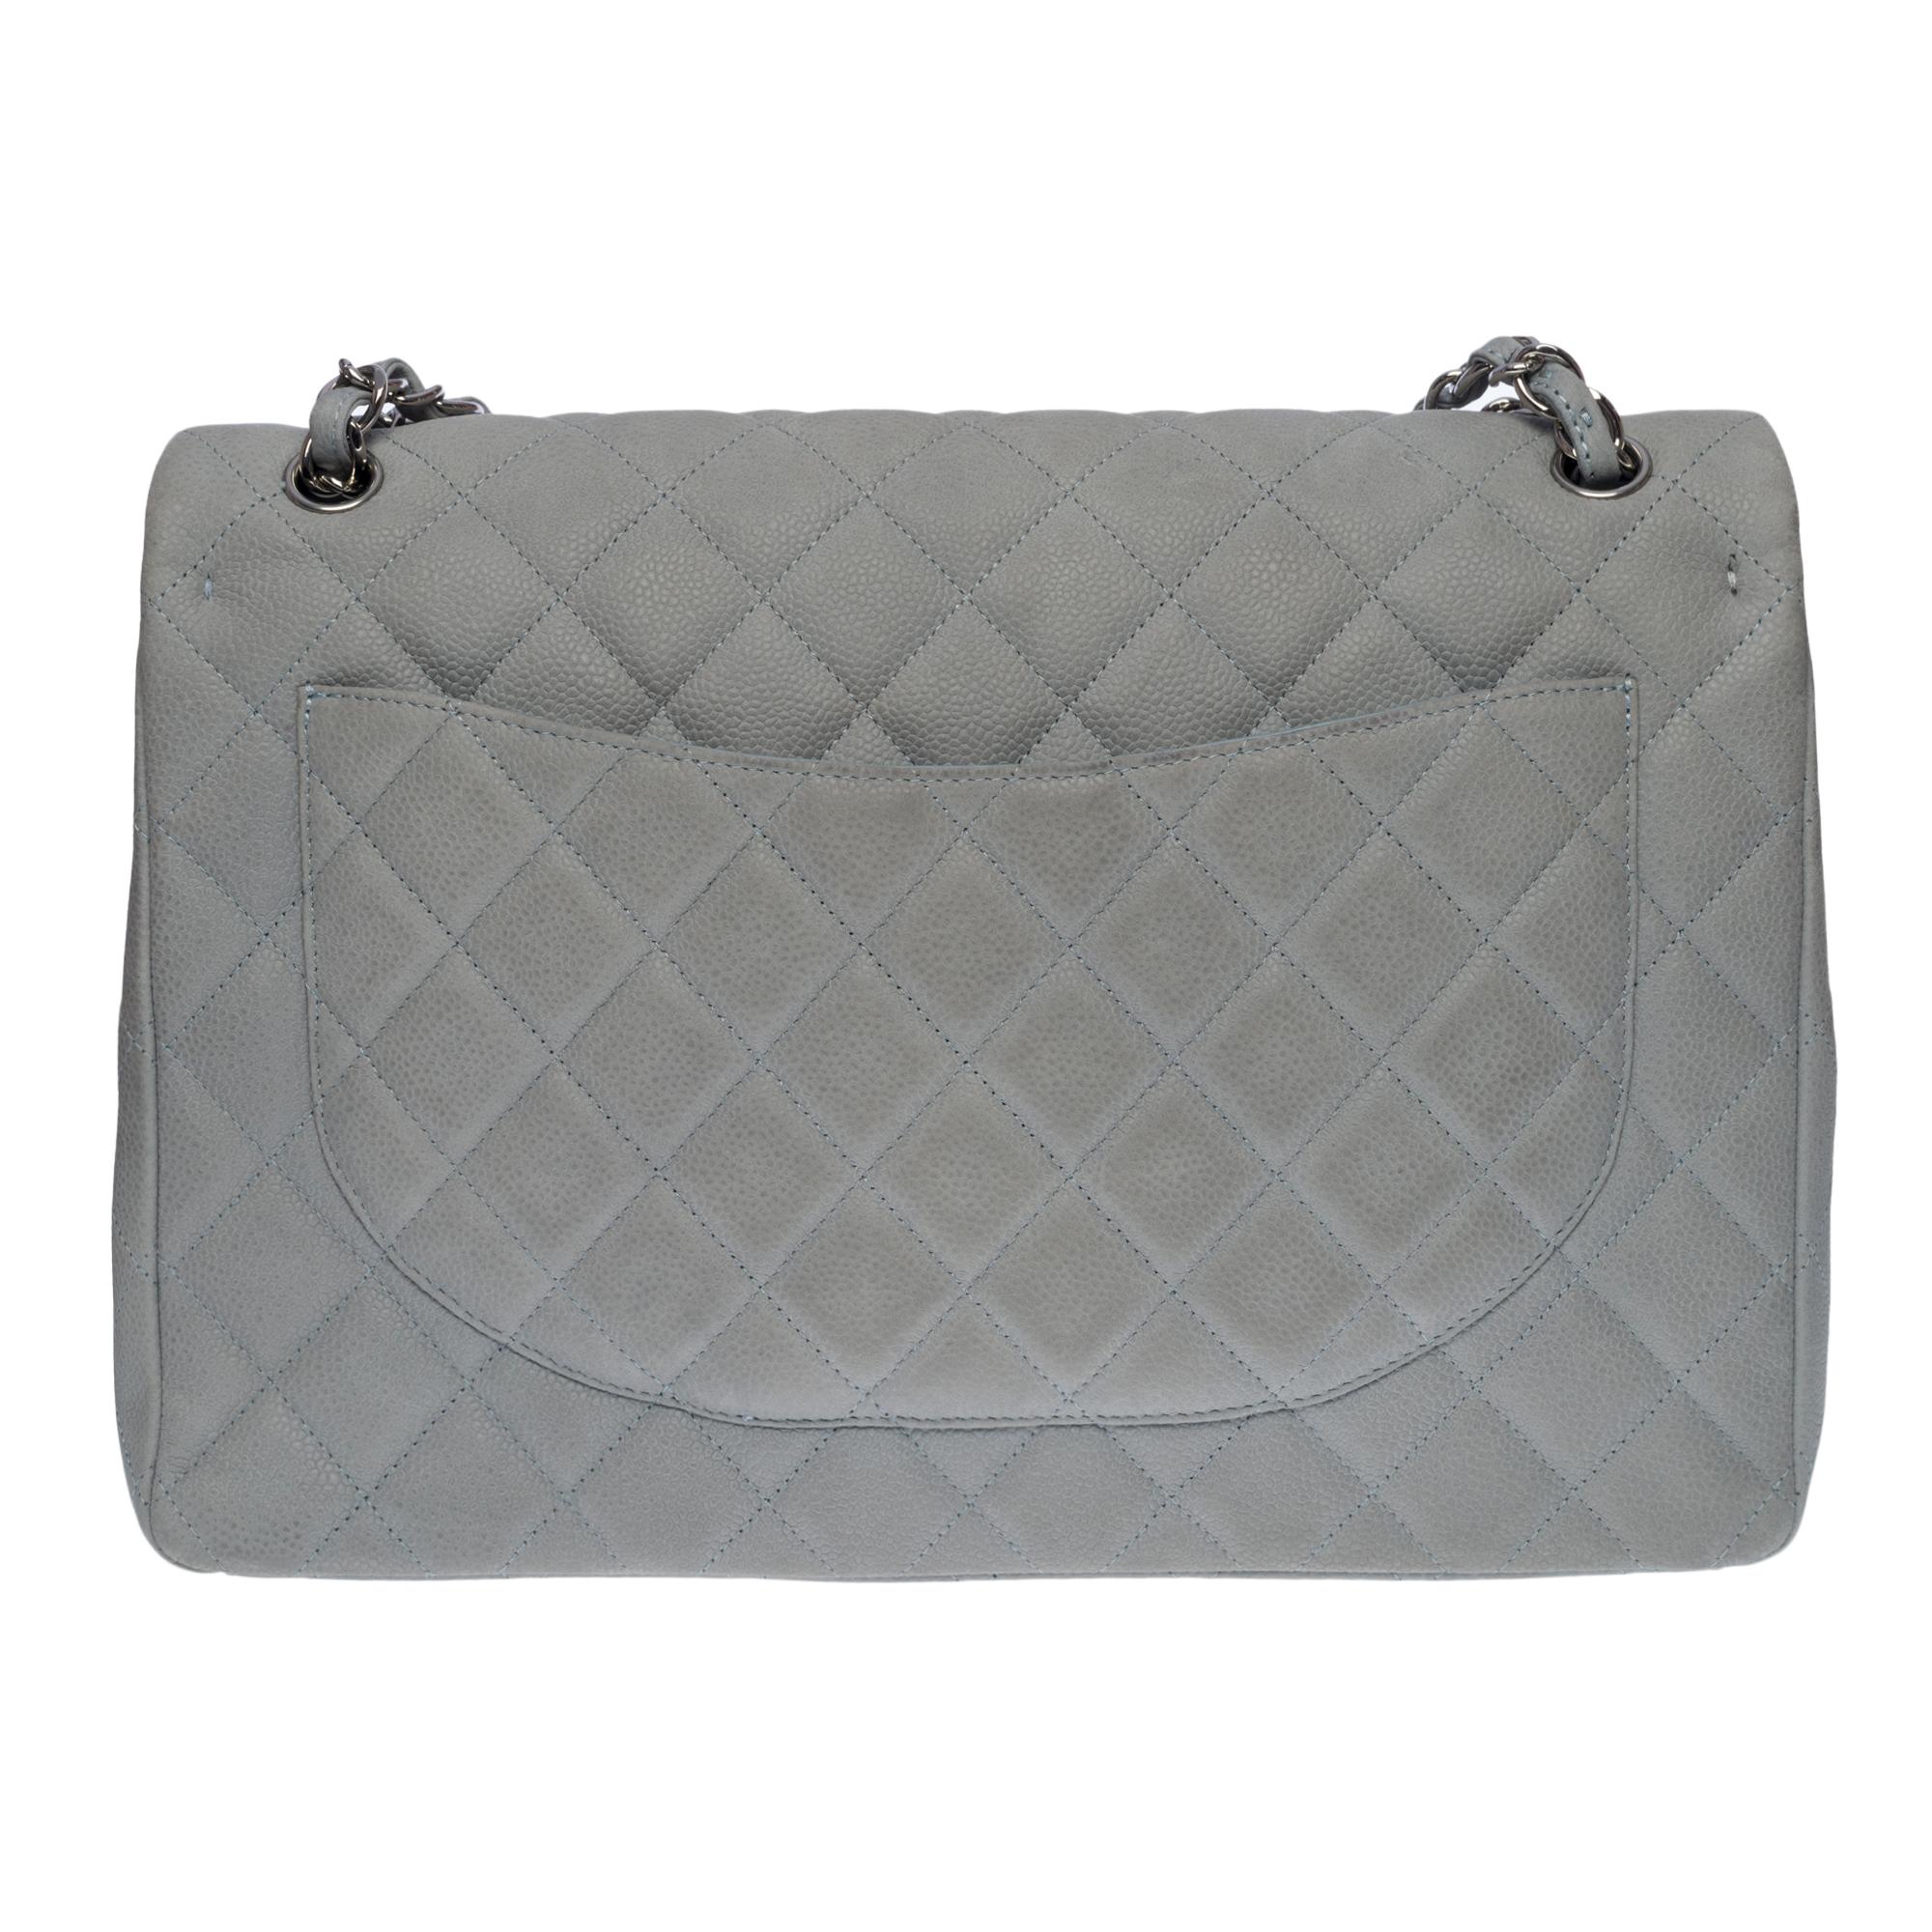 Majestic and Splendid Chanel Timeless Maxi Jumbo double flap shoulder bag in grey quilted caviar leather, silver metal hardware, a silver metal chain handle interwoven with grey caviar leather for a hand and shoulder support
 
A patch pocket on the